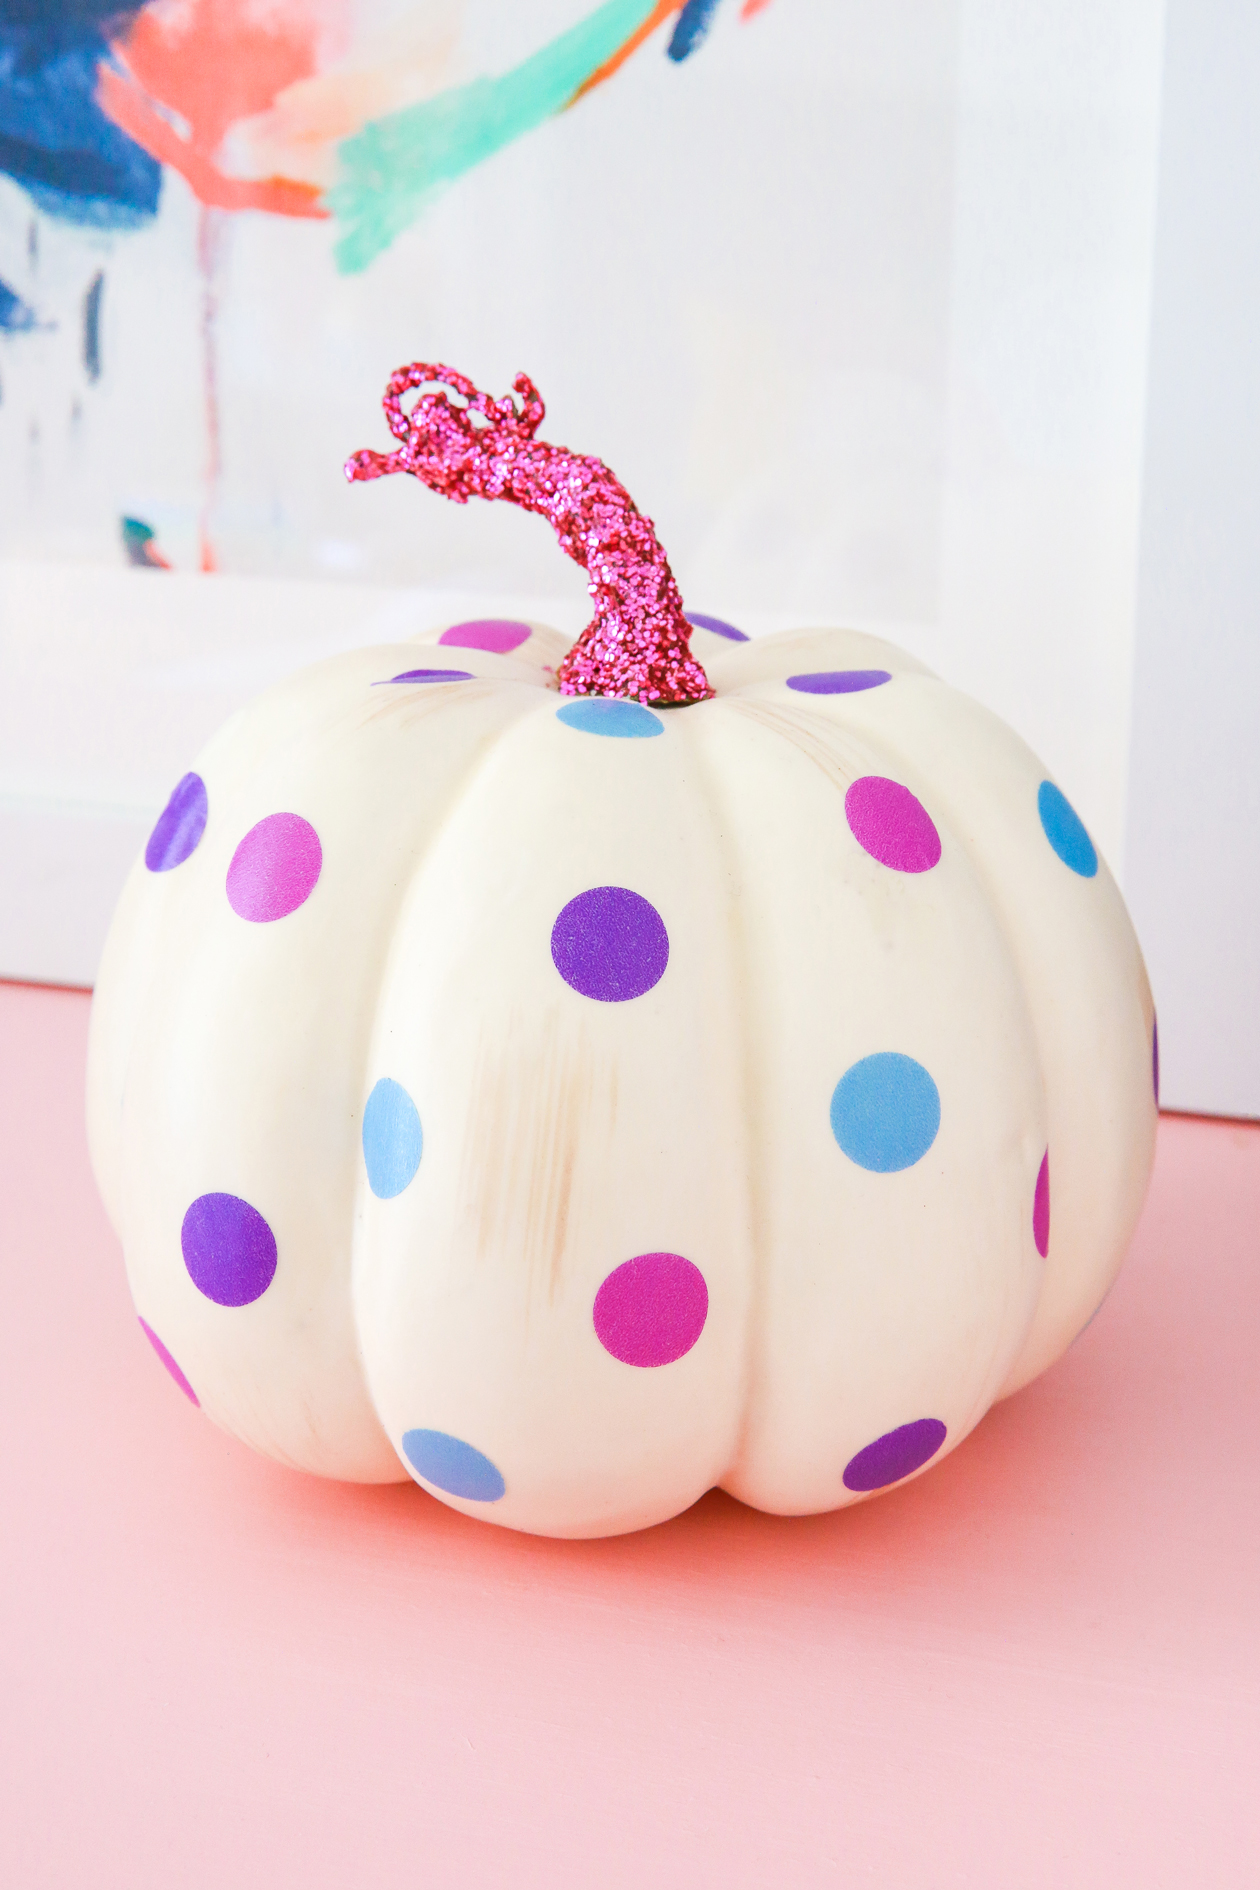 Learn how to make this DIY Polka Dot Pumpkin in 10 minutes or less!